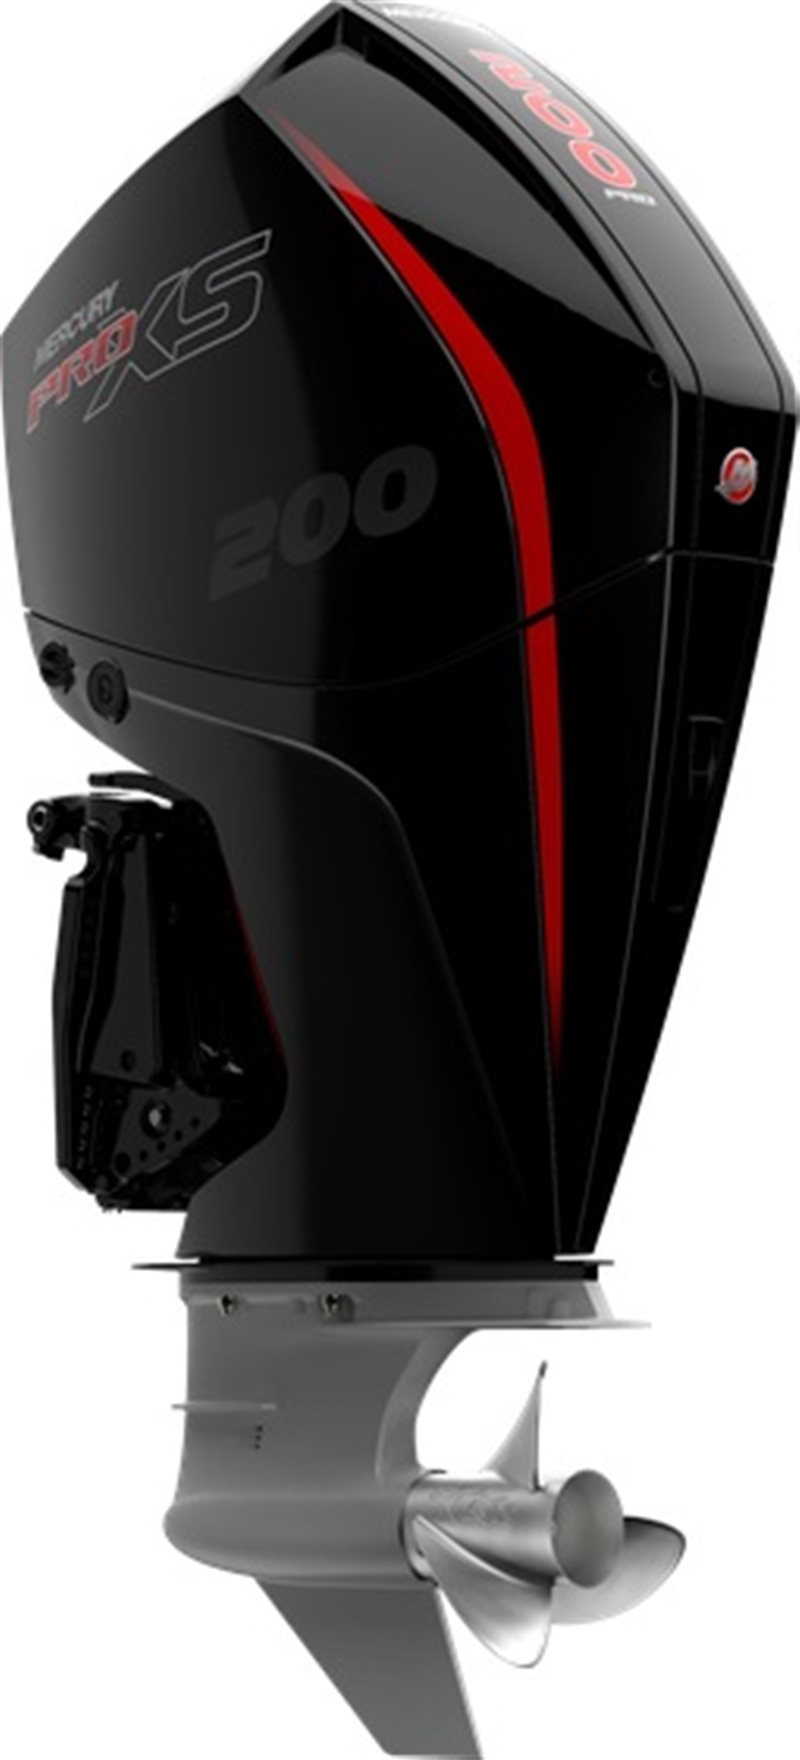 2020 Mercury Outboard Pro XS 175 - 300 Pro XS 200 at Fort Fremont Marine